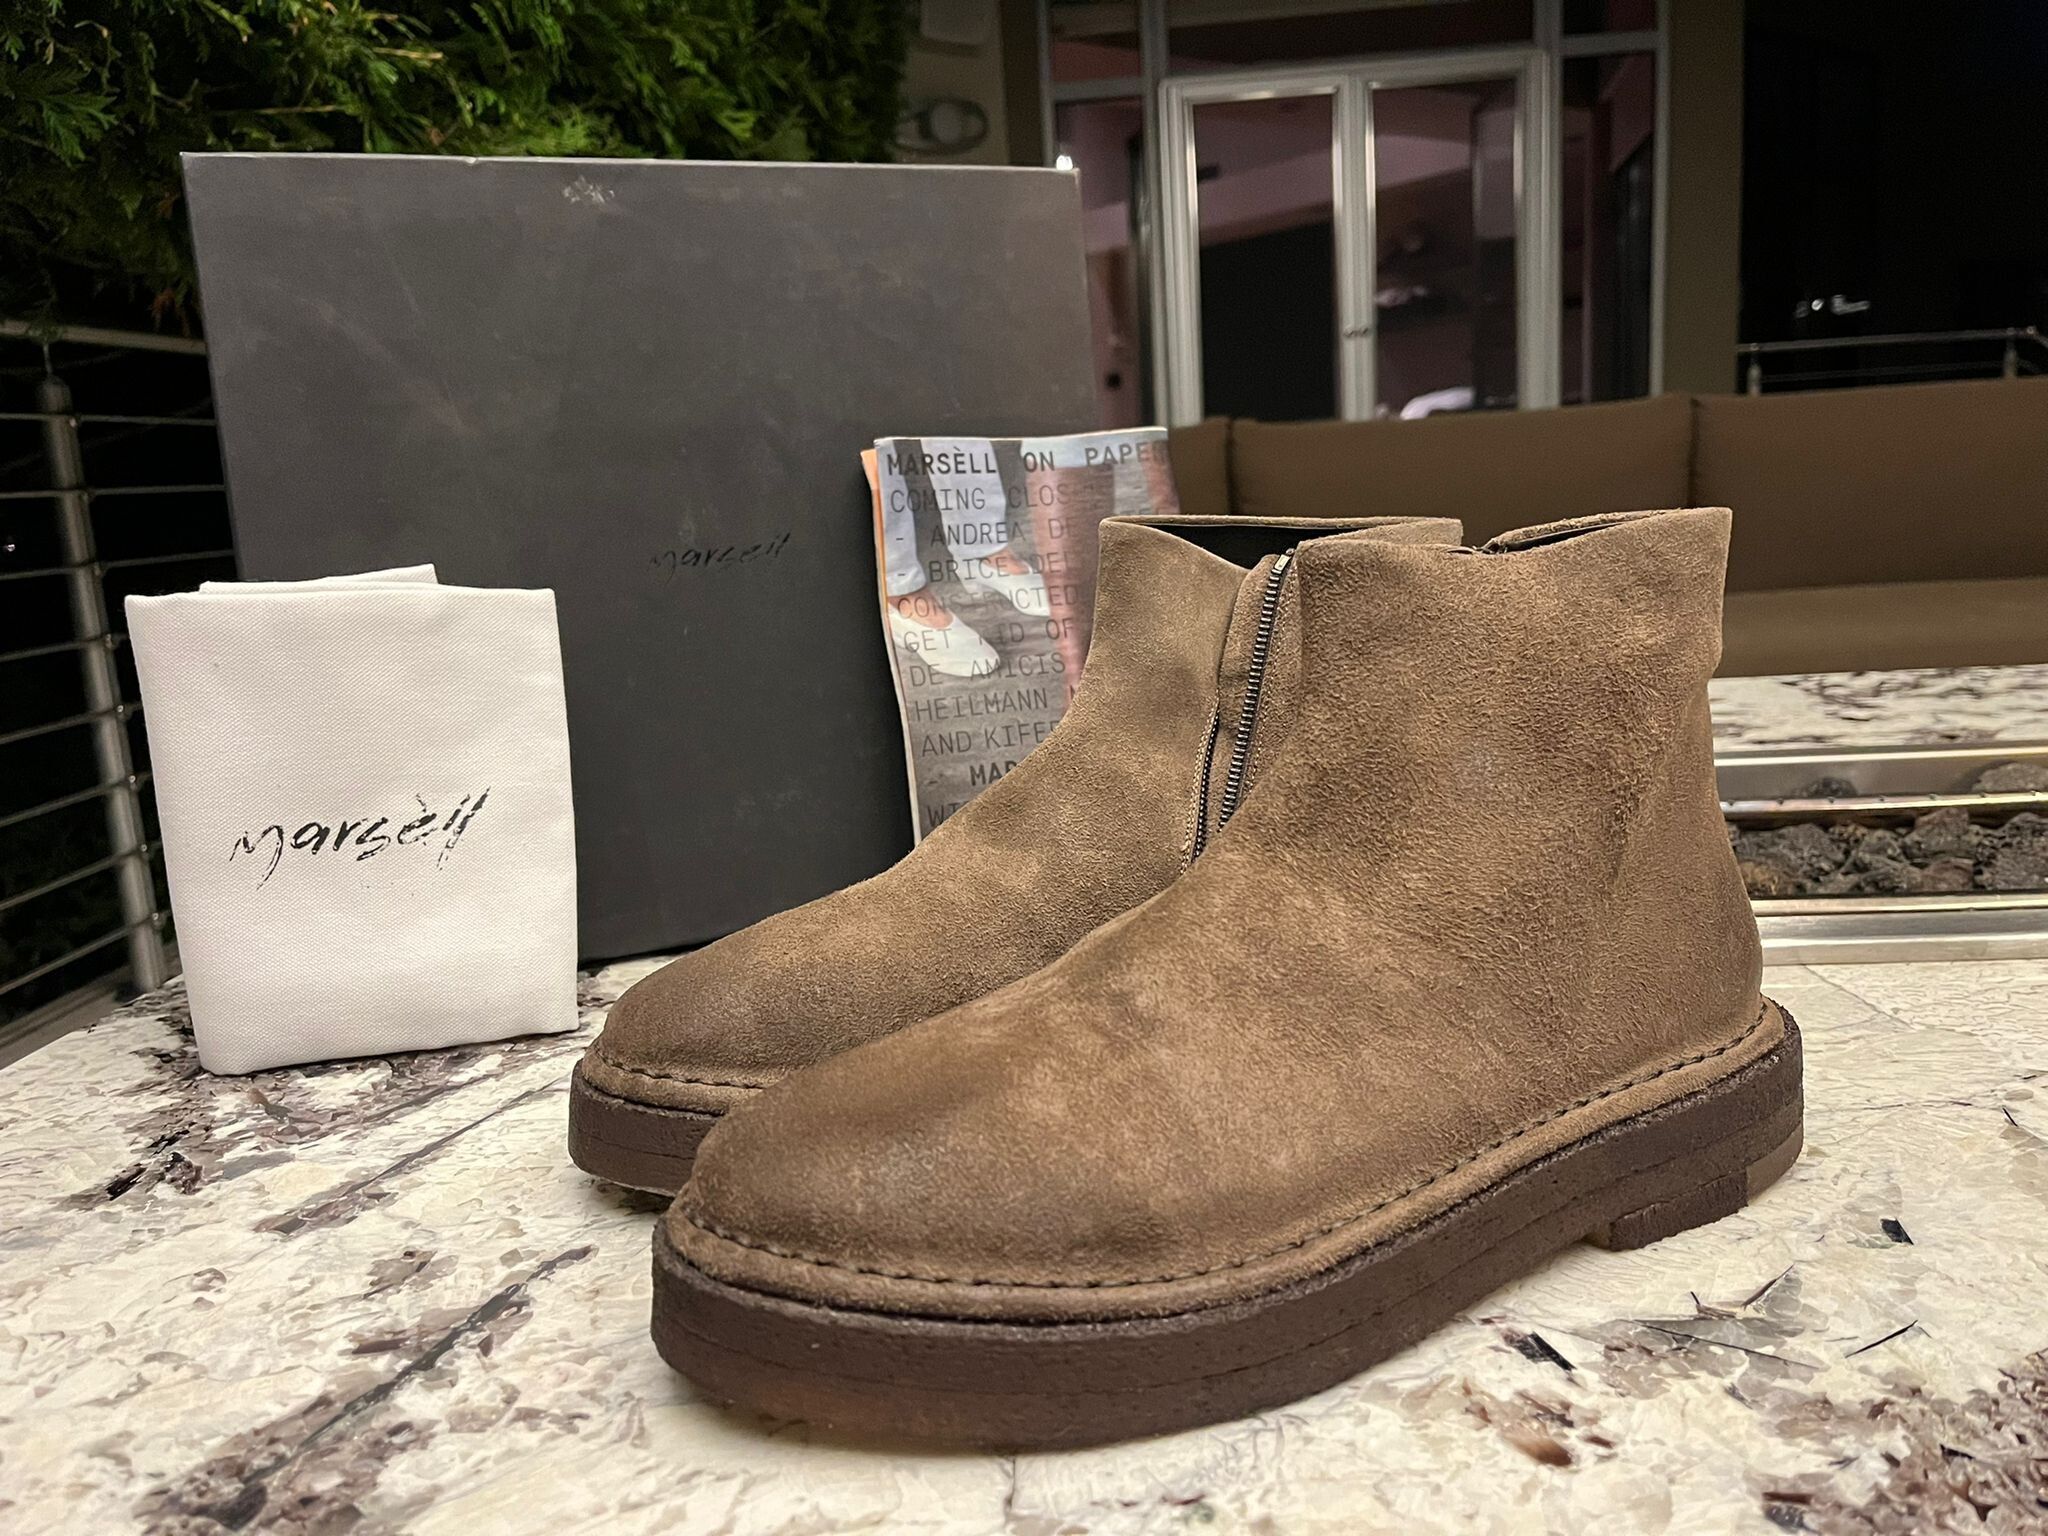 Marsell Parapa Tronchetto Zip Boots in Brown | Grailed